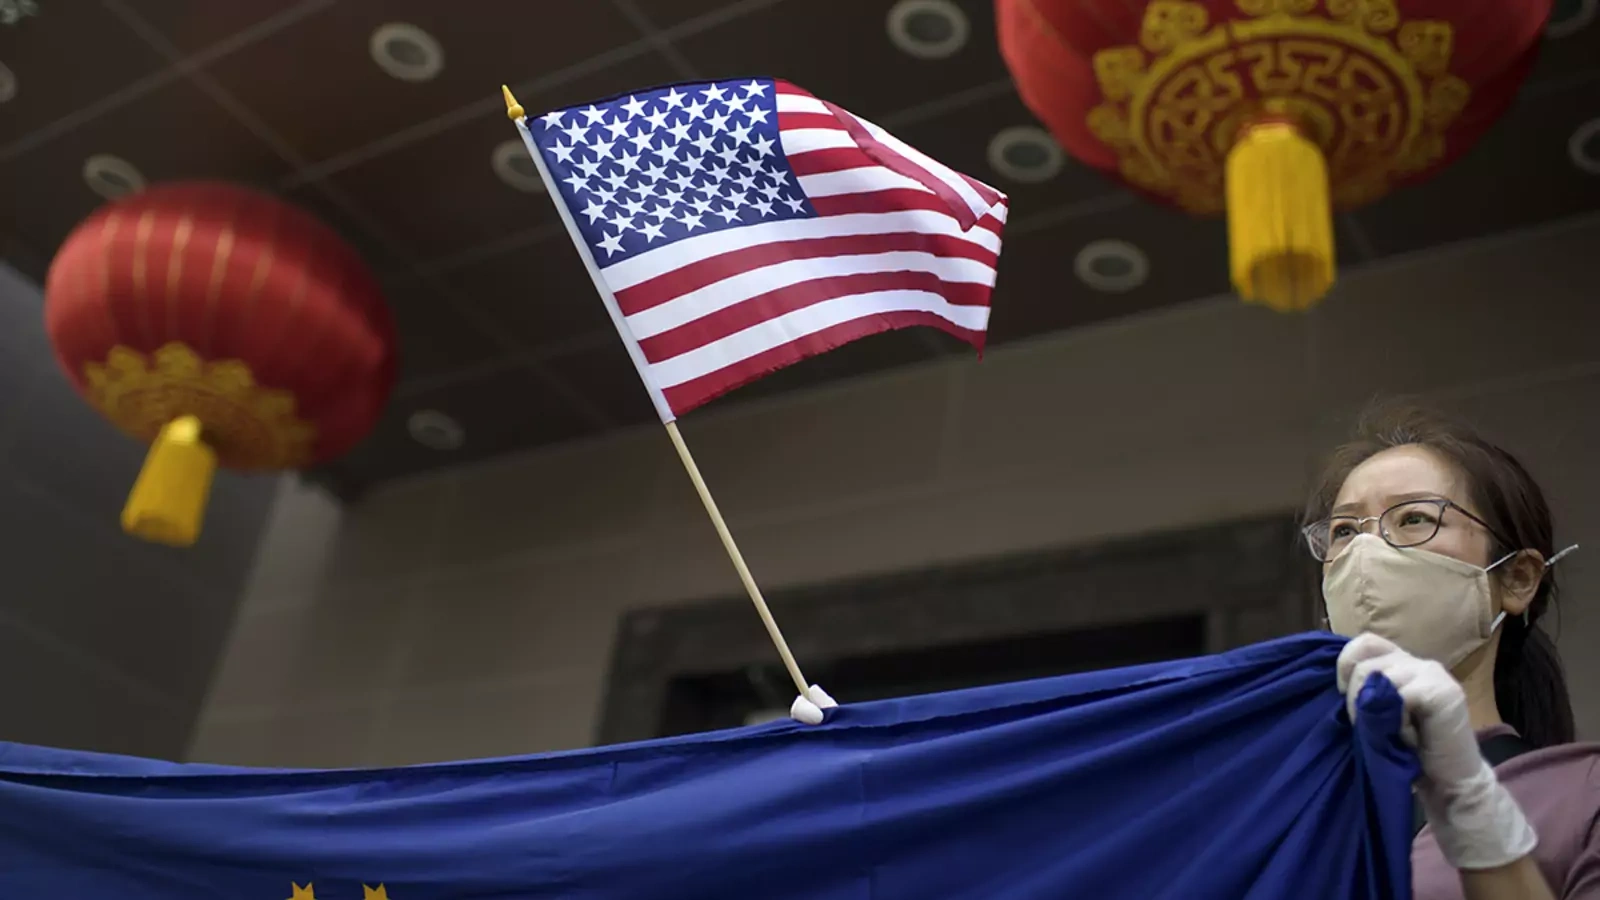 A protester holds a U.S. flag outside of the Chinese consulate in Houston after the U.S. State Department ordered China to close the consulate.